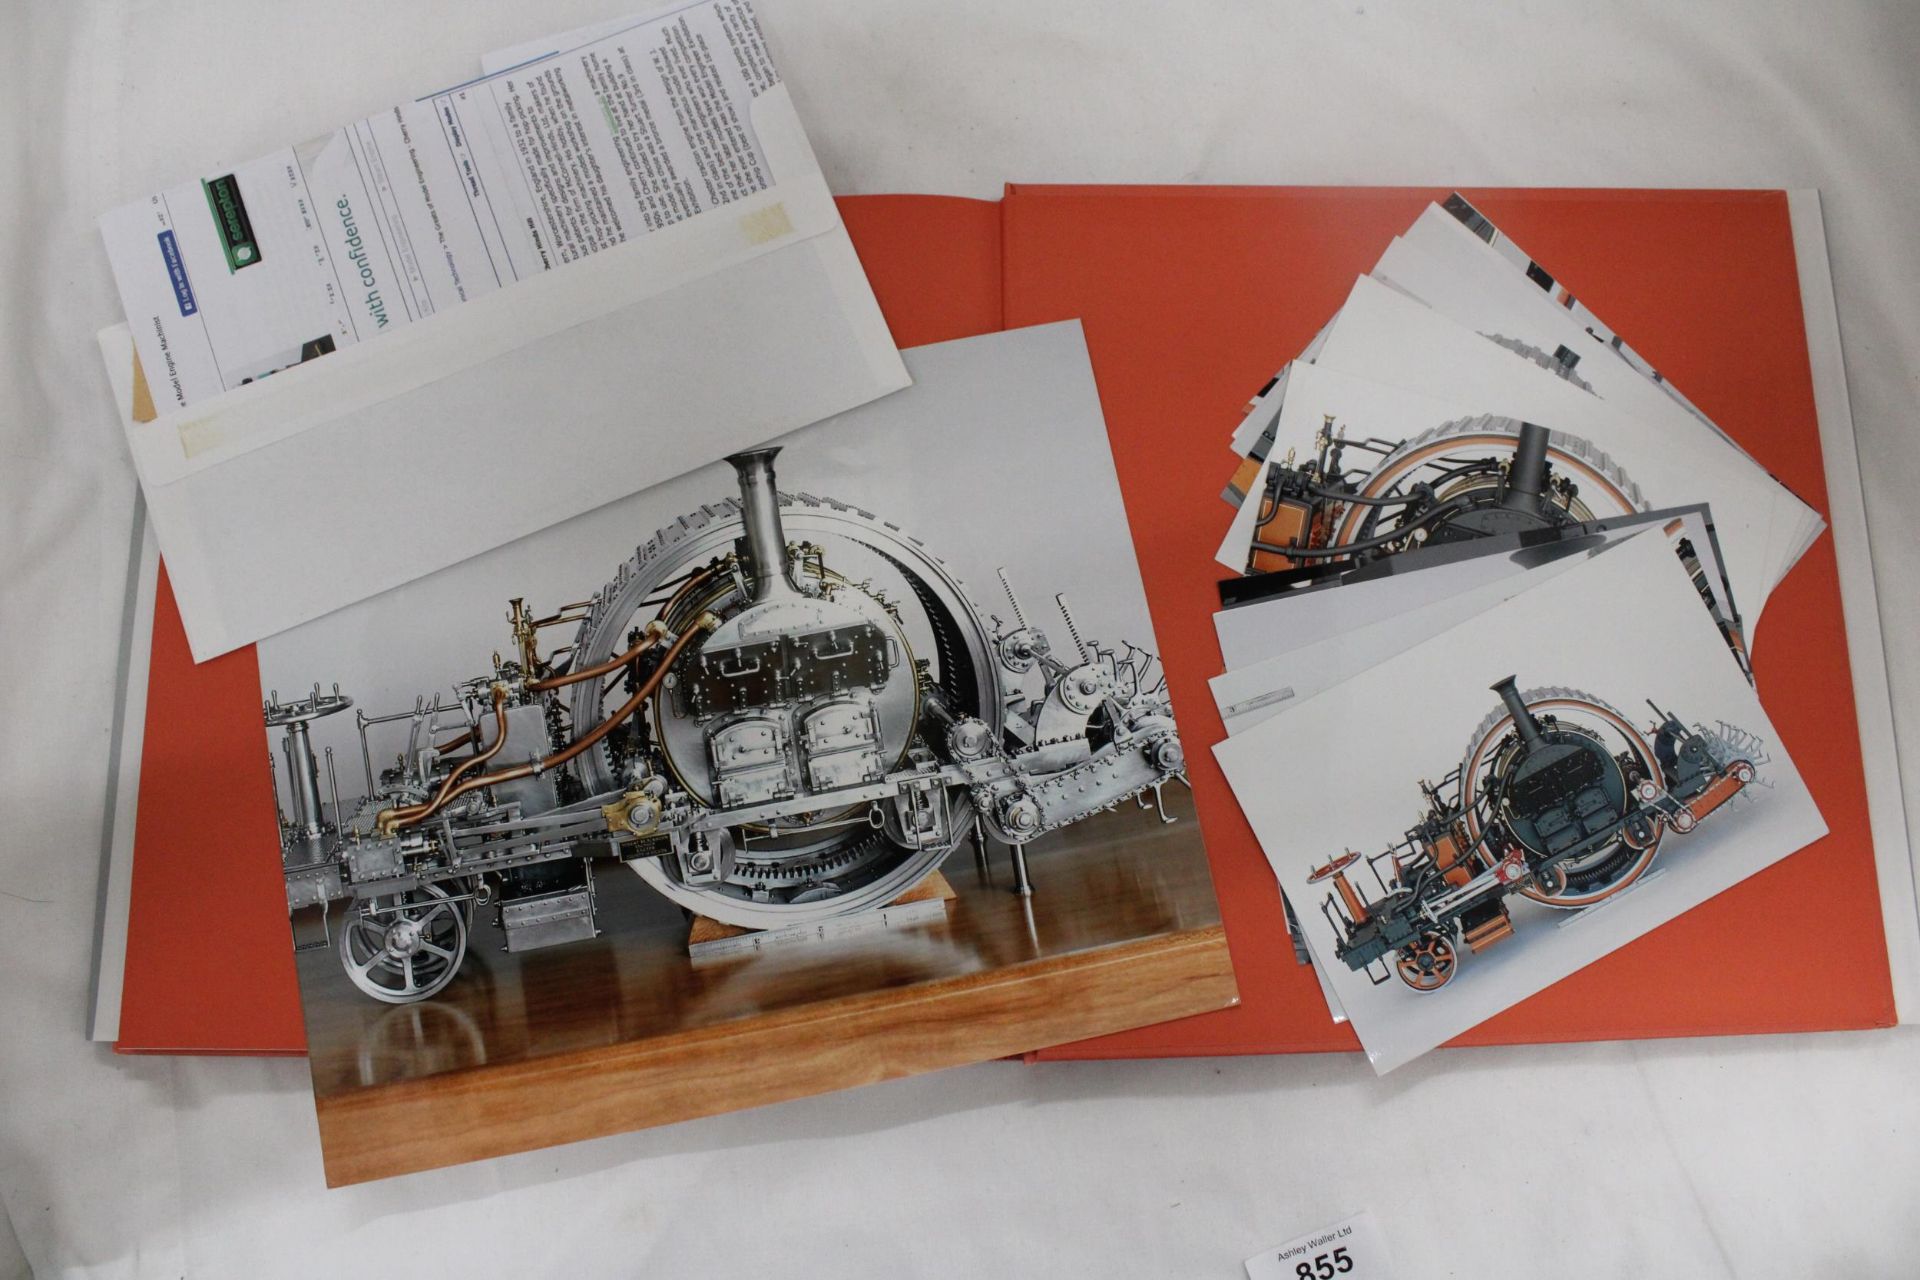 A HARDBACK COPY OF 'CHERRY'S MODEL ENGINES', THE STORY OF THE REMARKABLE CHERRY HILL - Image 4 of 4